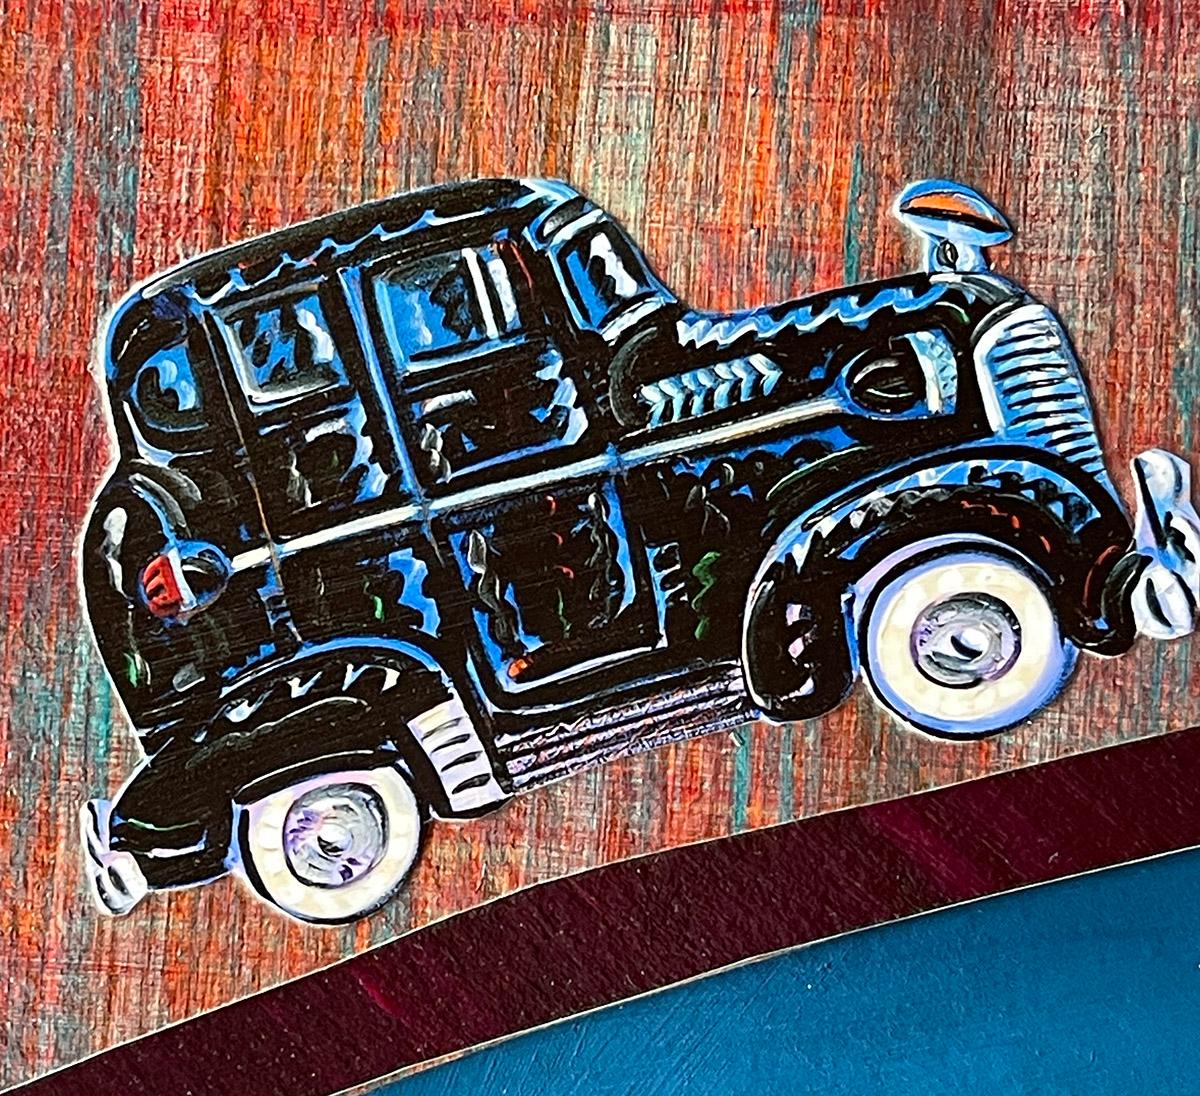 This one of two stencil and collage paintings  (AP 1/2) made on handmade paper from Bhutan.  Cars are a central theme in a lot of Chicano art, and Frank Romero has made several famous images on the theme.

Throughout his 40 year career as an artist,